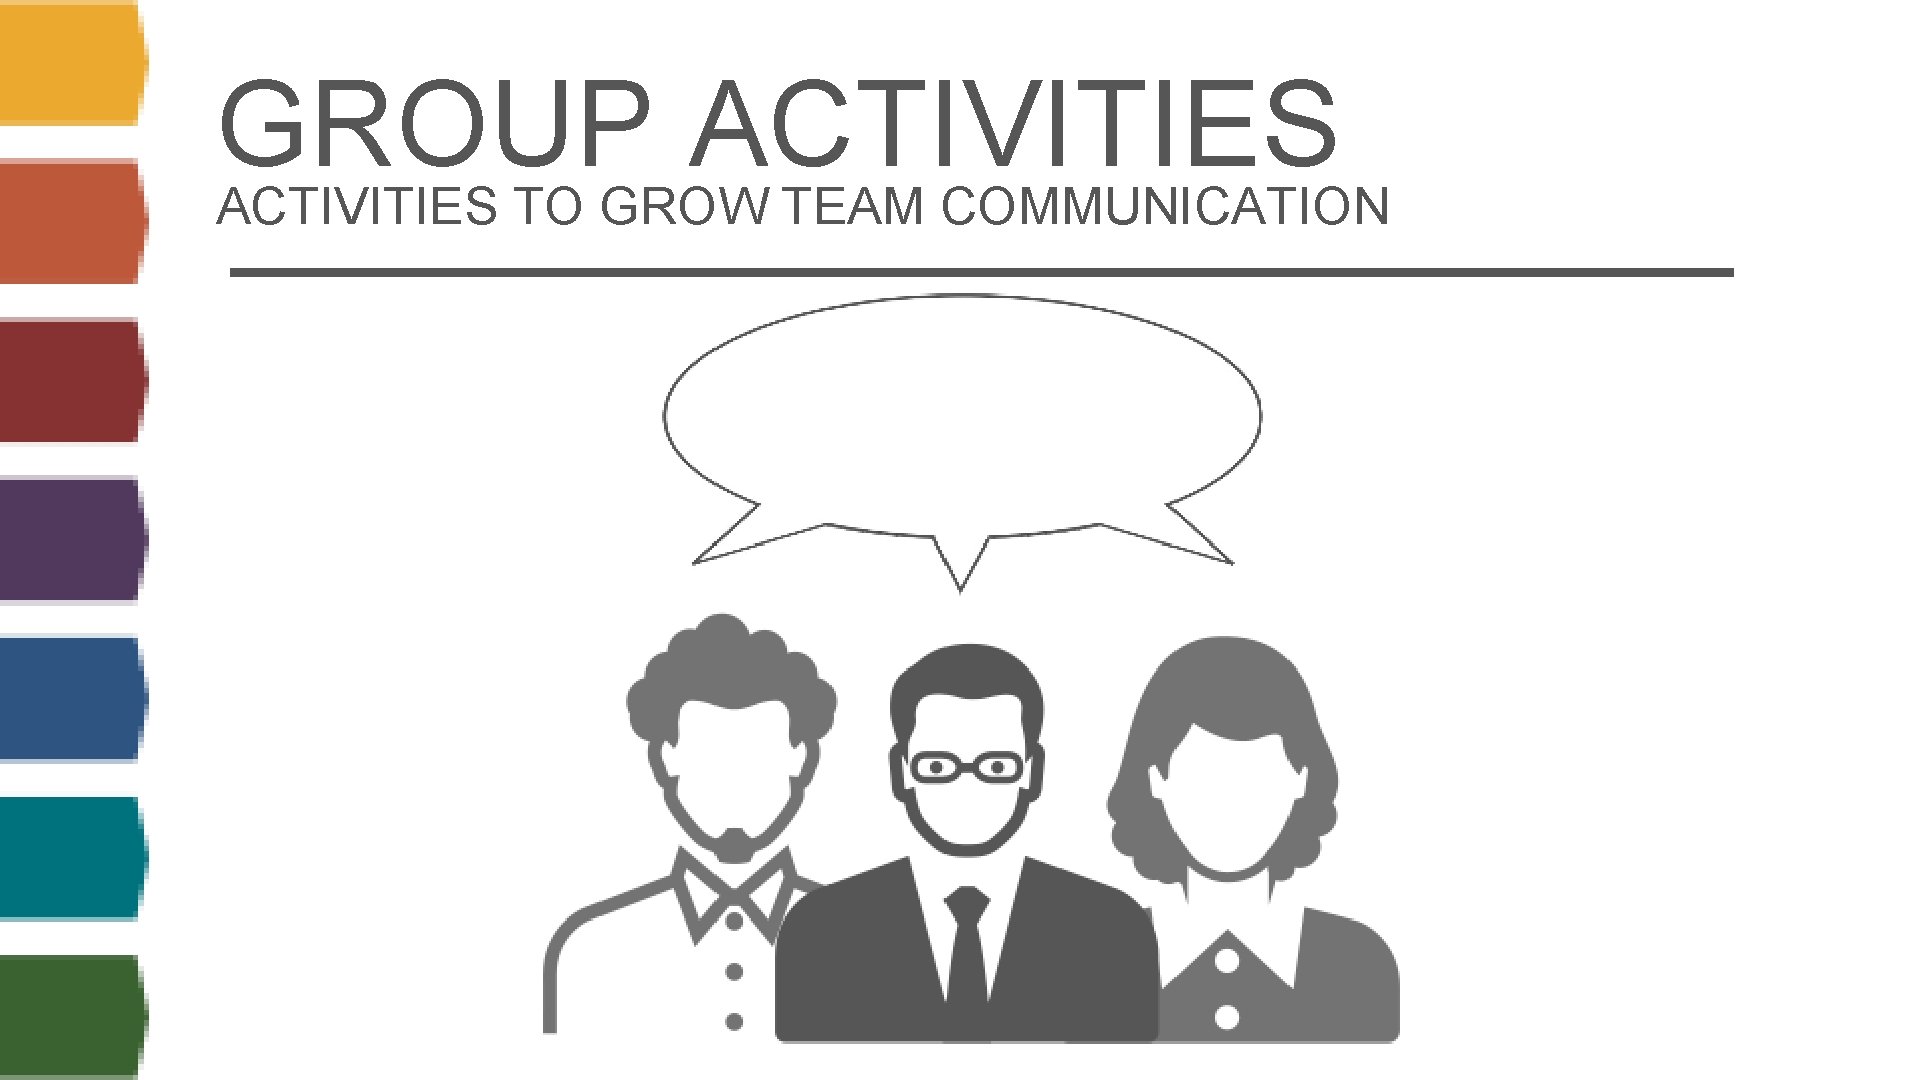 GROUP ACTIVITIES TO GROW TEAM COMMUNICATION 